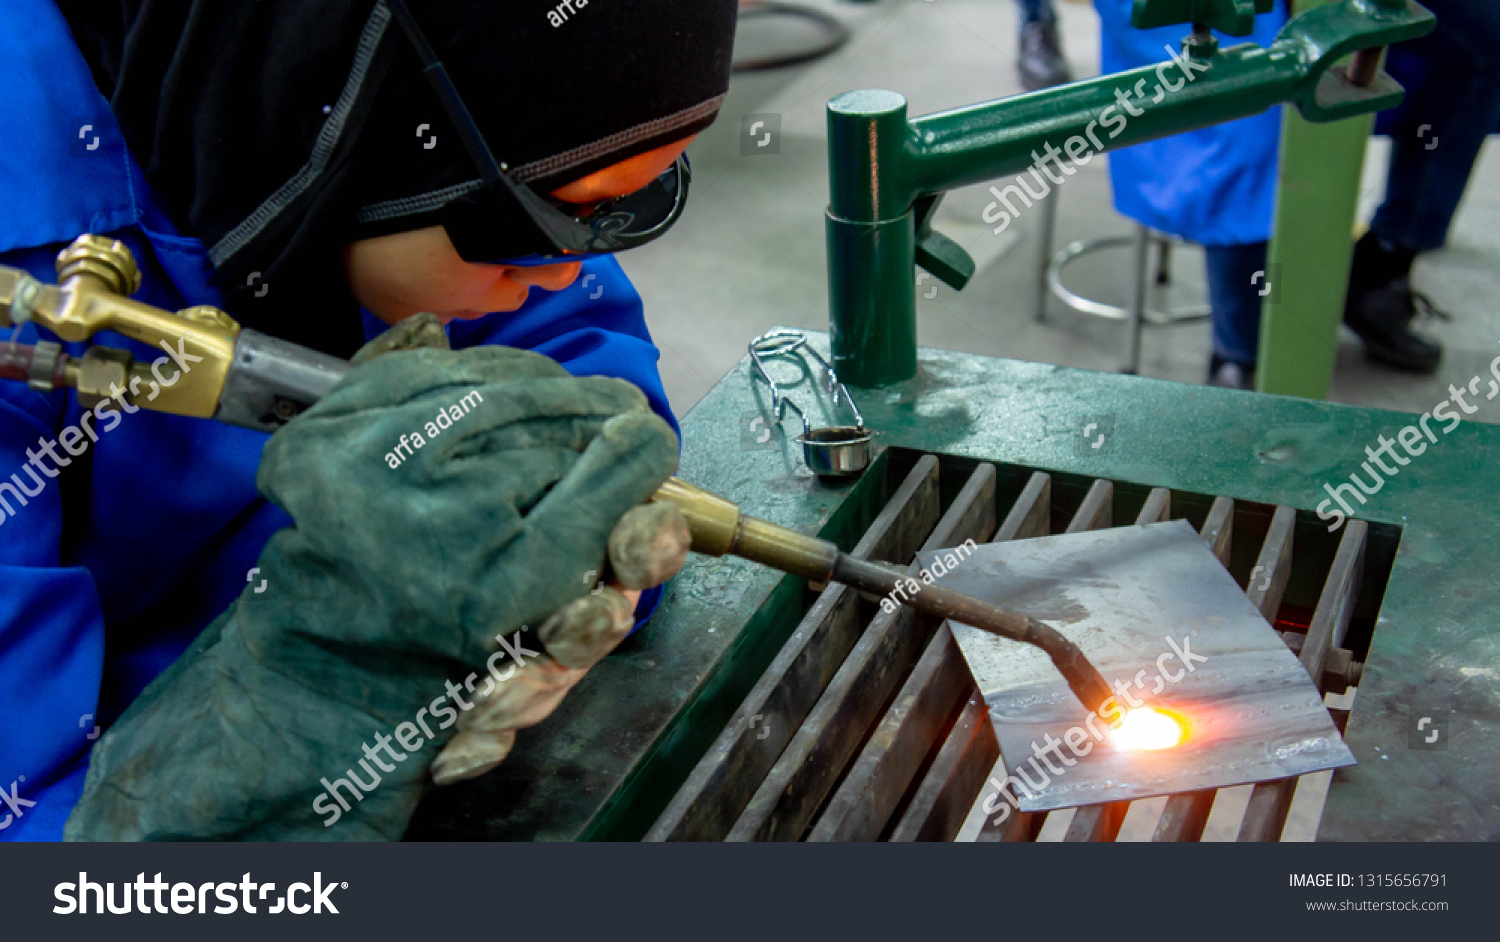 stock-photo-bangi-malaysia-february-girl-with-hijab-performing-oxy-acetylene-welding-in-a-workshop-1315656791.jpg